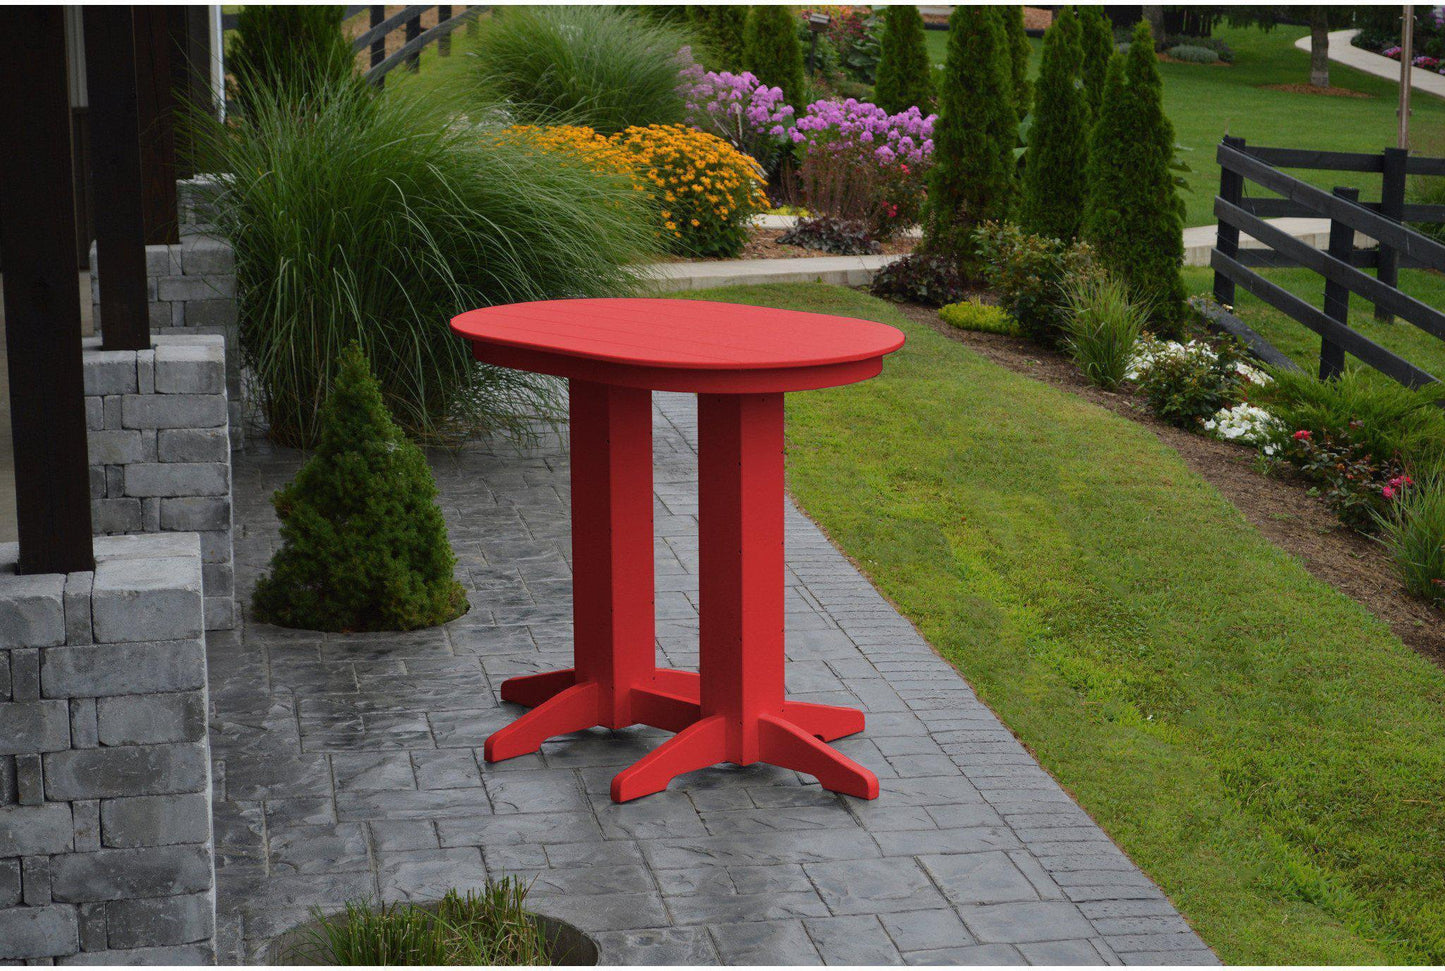 A&L Furniture Recycled Plastic 4' Oval Bar Table - Bright Red